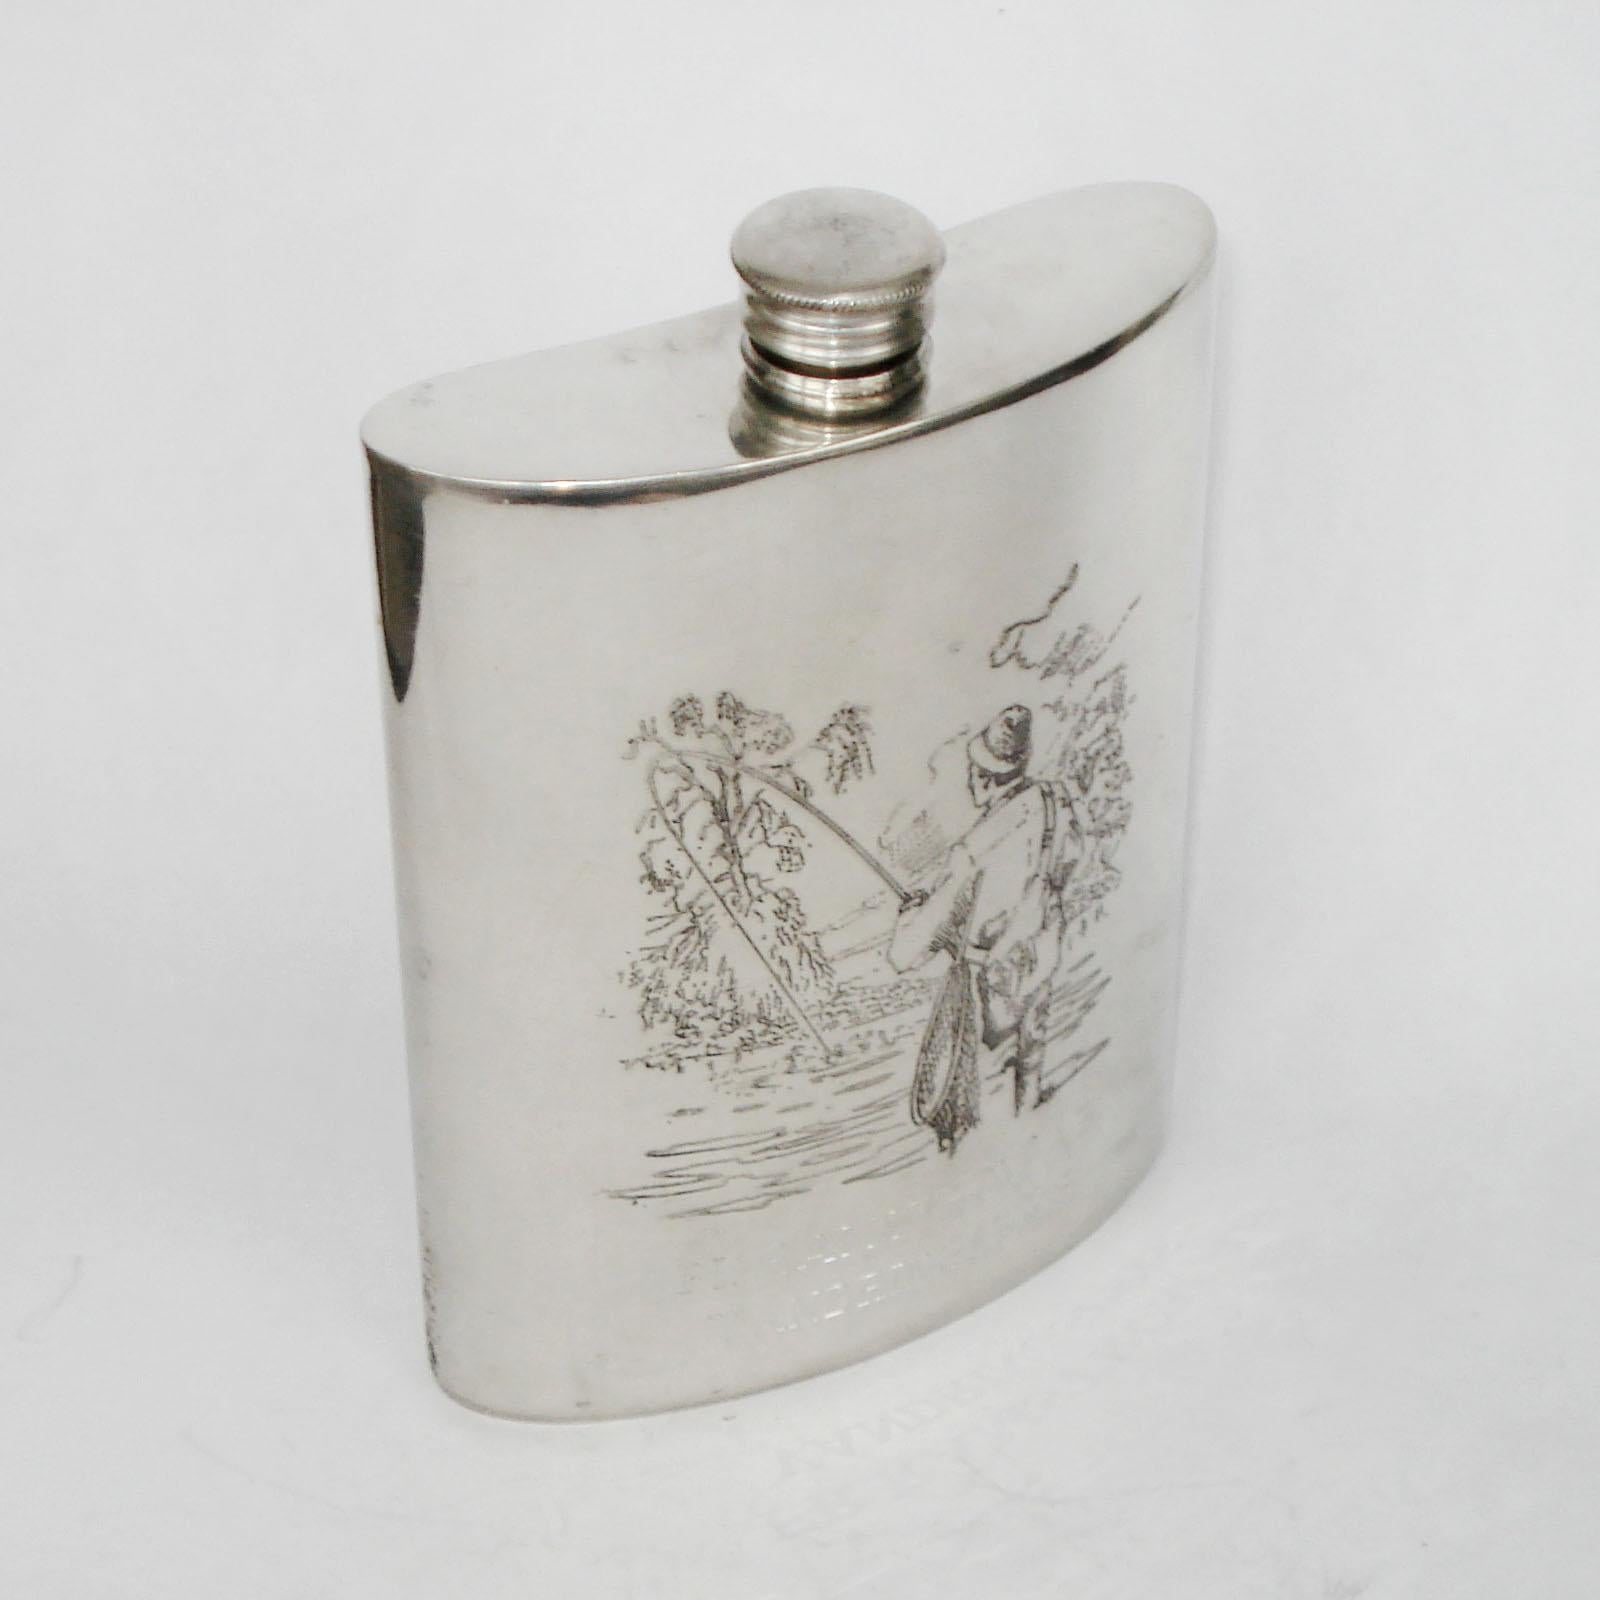 Vintage pewter hip flask Engraved Décor, Sweden 1950s. Fisherman decor to the front, jumping fishes to the backside. Marked to the bottom with maker's mark. In very good used condition, with minimal wear.
Dimensions: height 13.5 cm, width 10 cm,